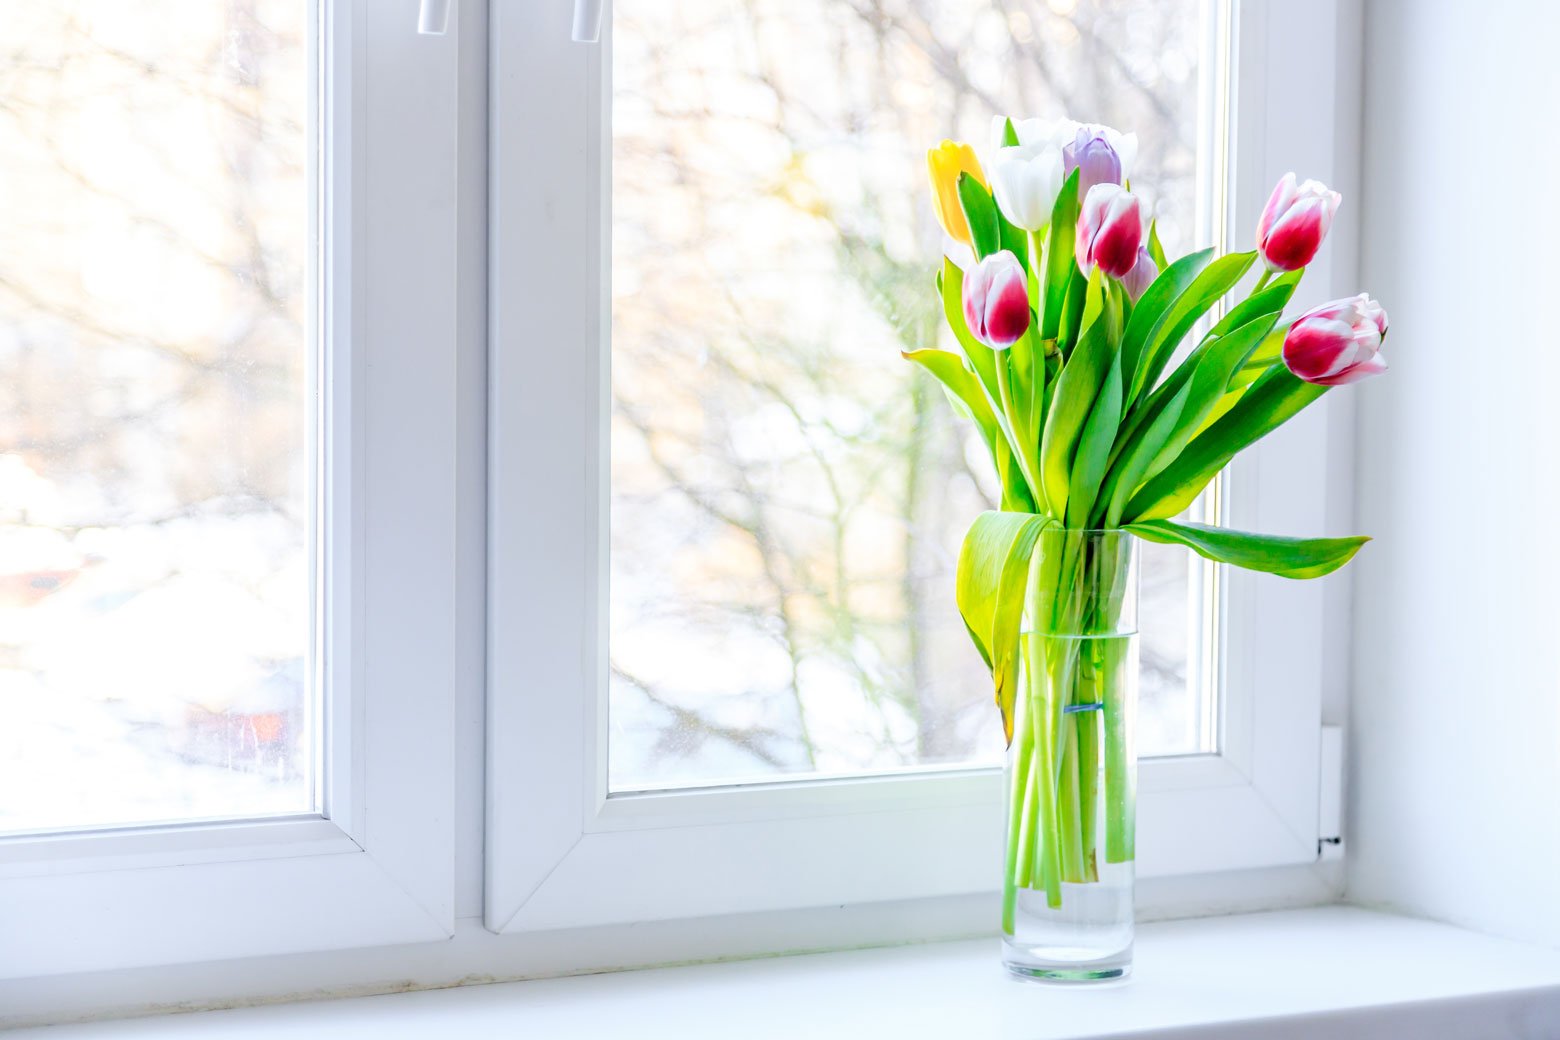 vase of tulips inside, demonstrating how it can look when you apply indoor air quality solutions